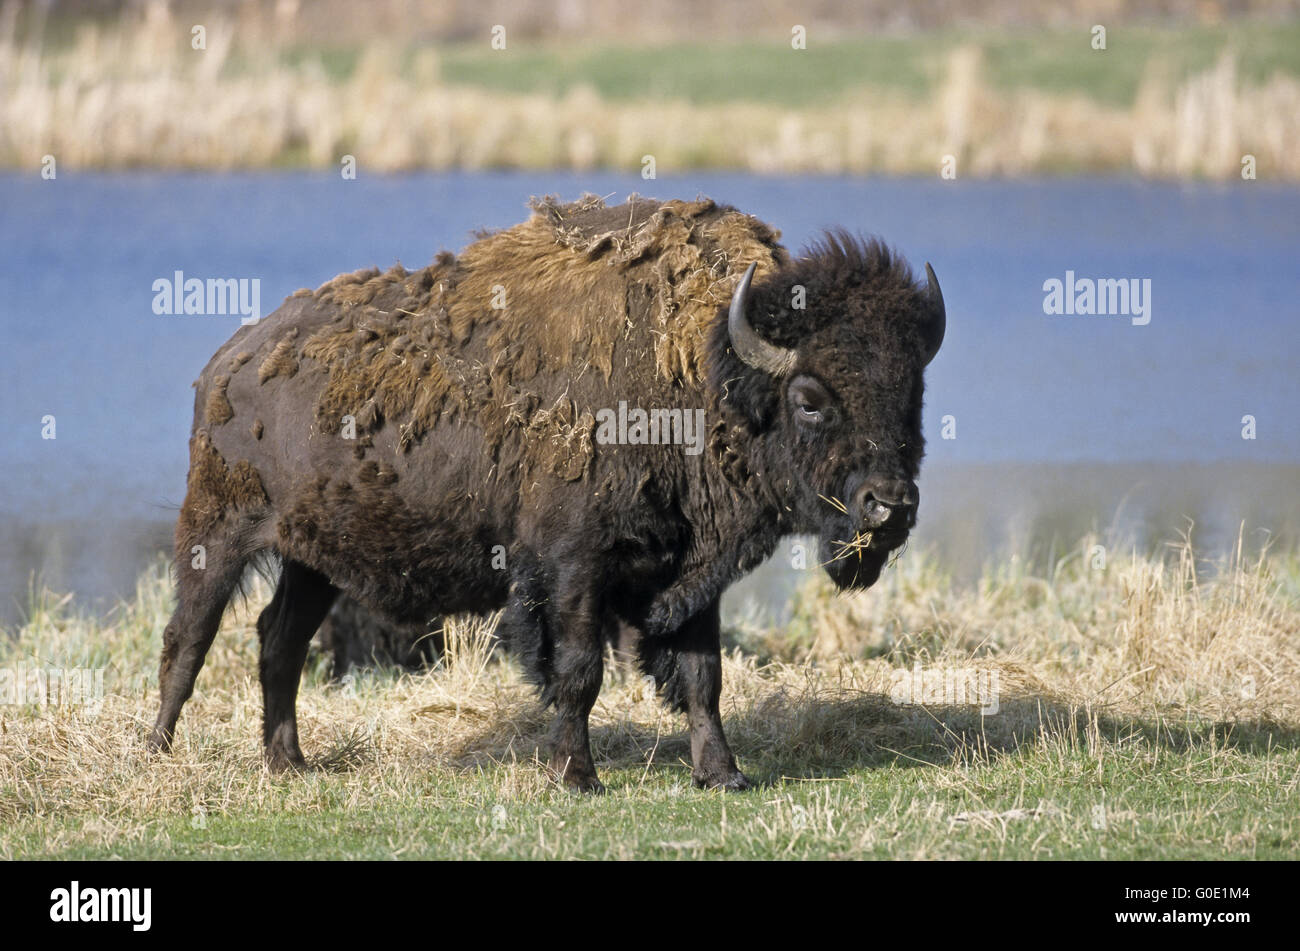 American Bison bull observes the photographer Stock Photo